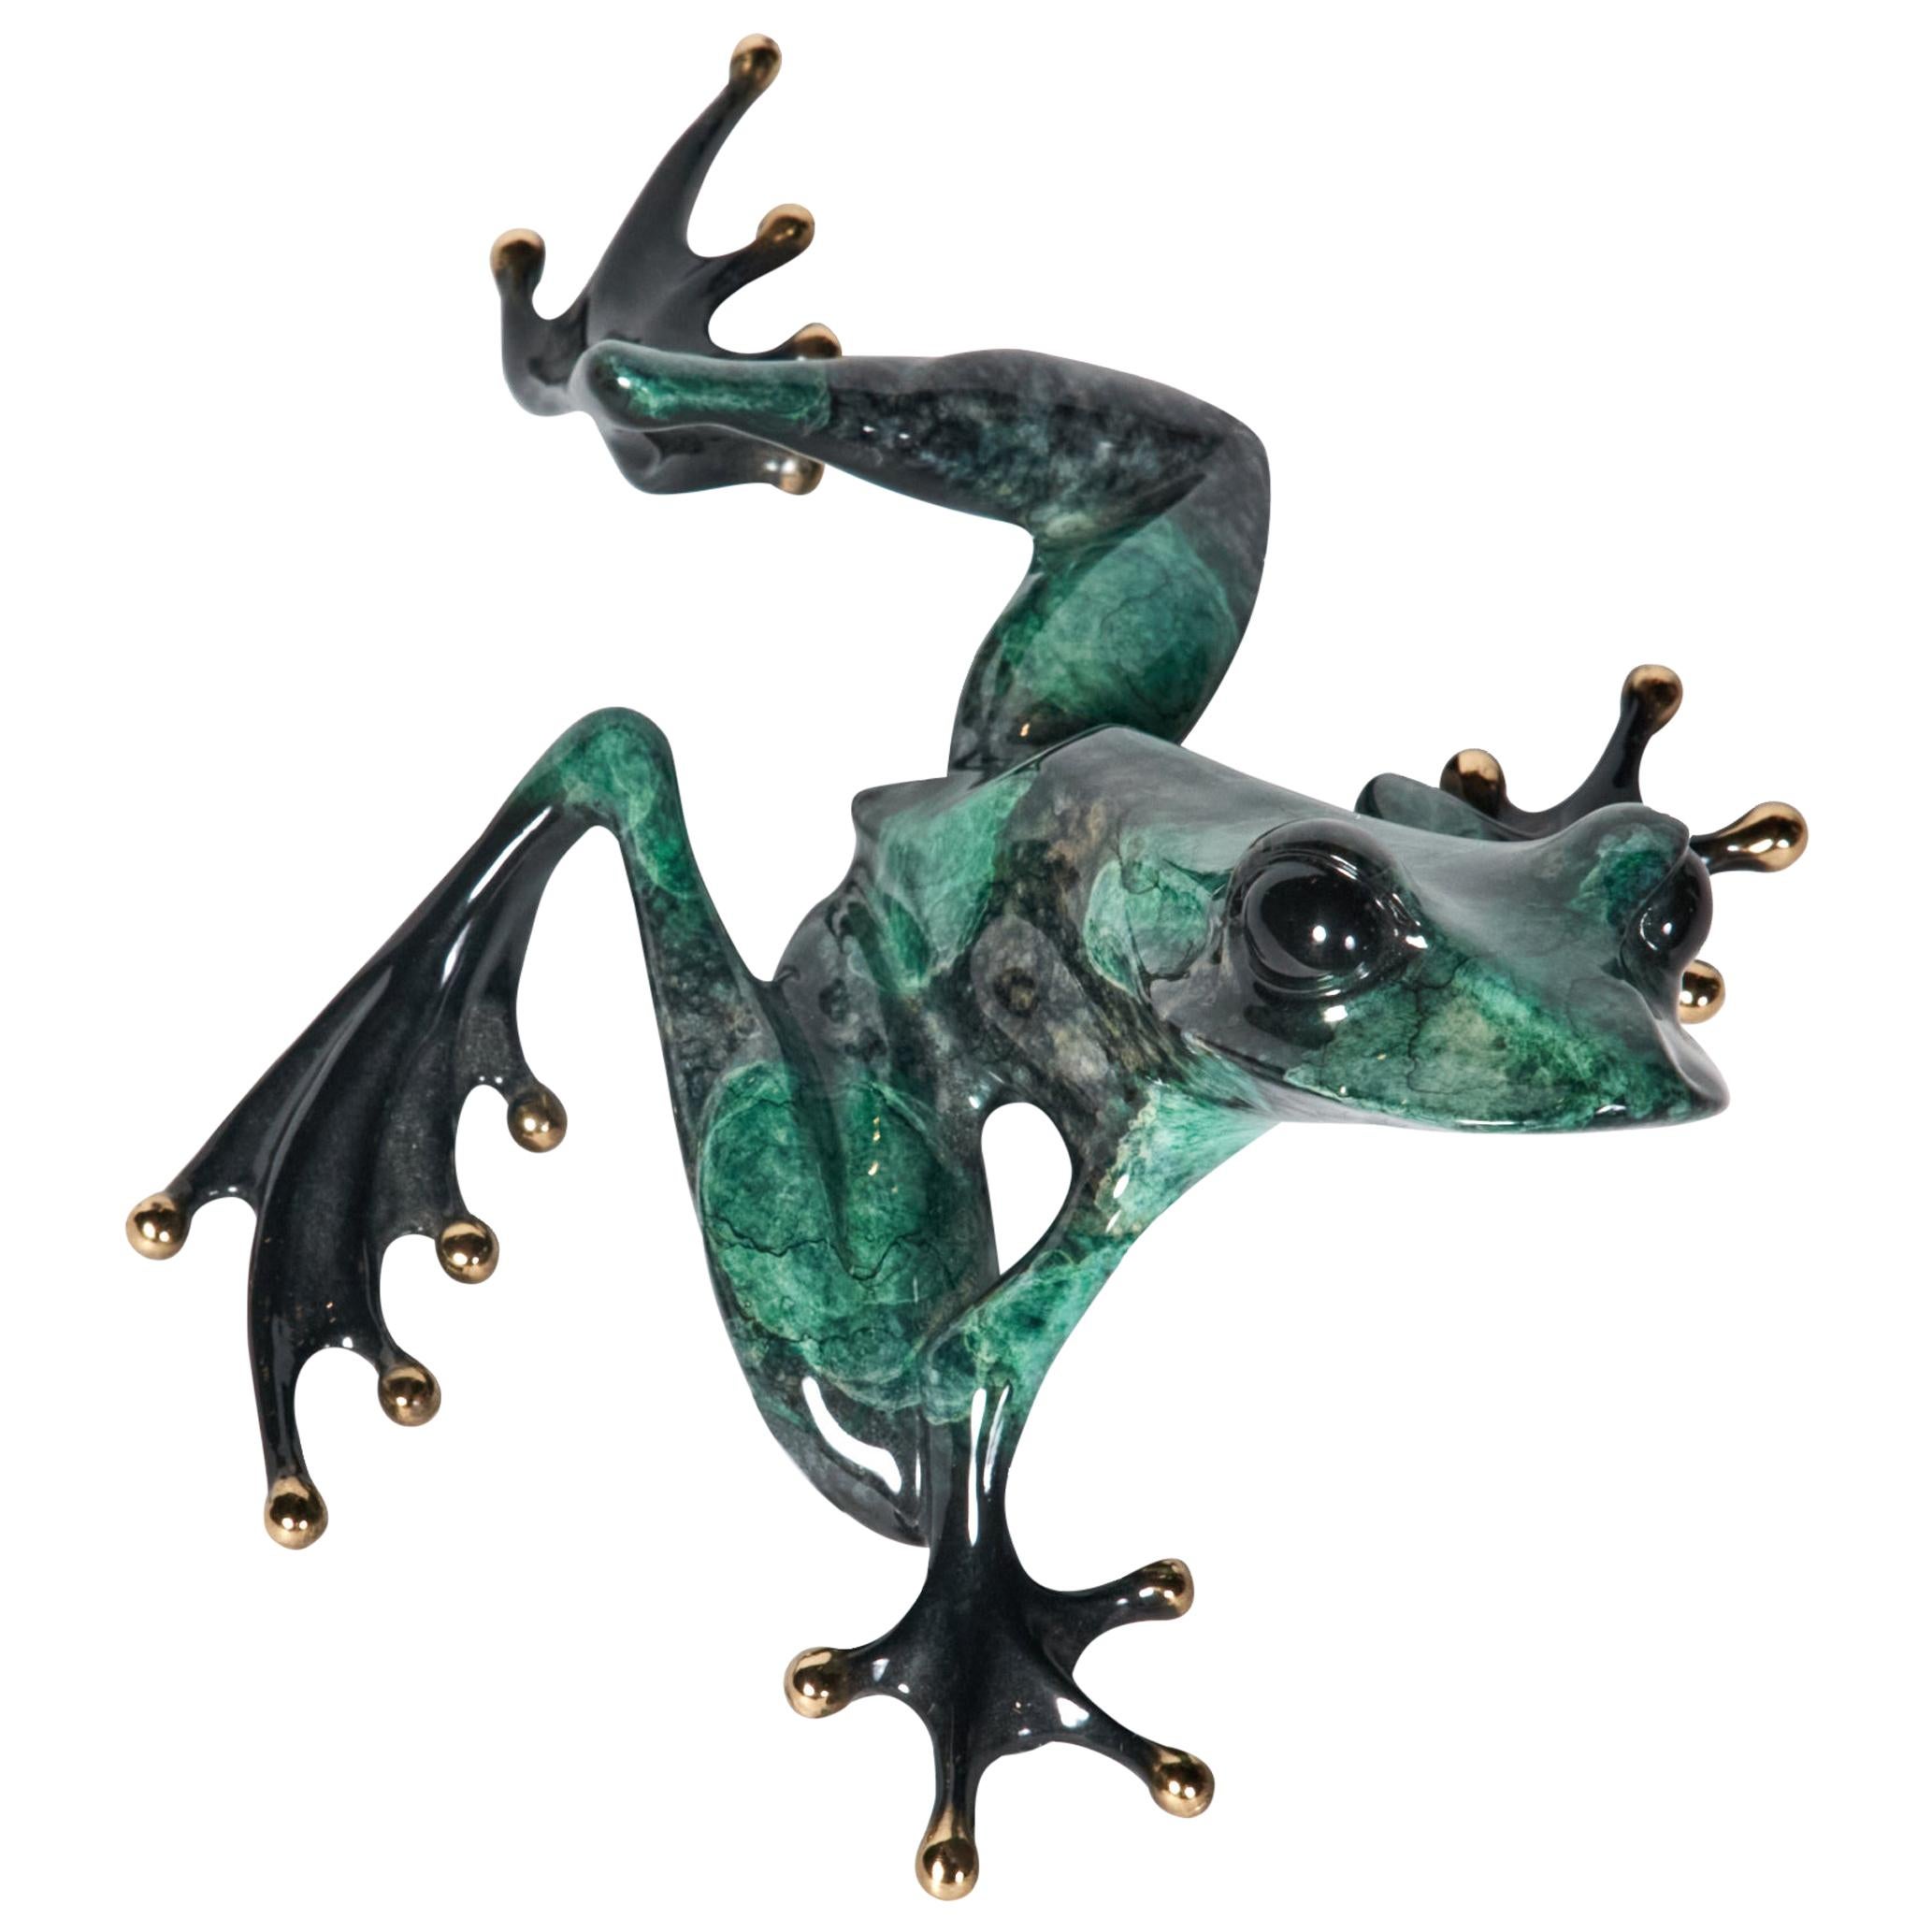 Enamel Hand Painted Bronze Frog by Tim Cotterill, #230 of 1000